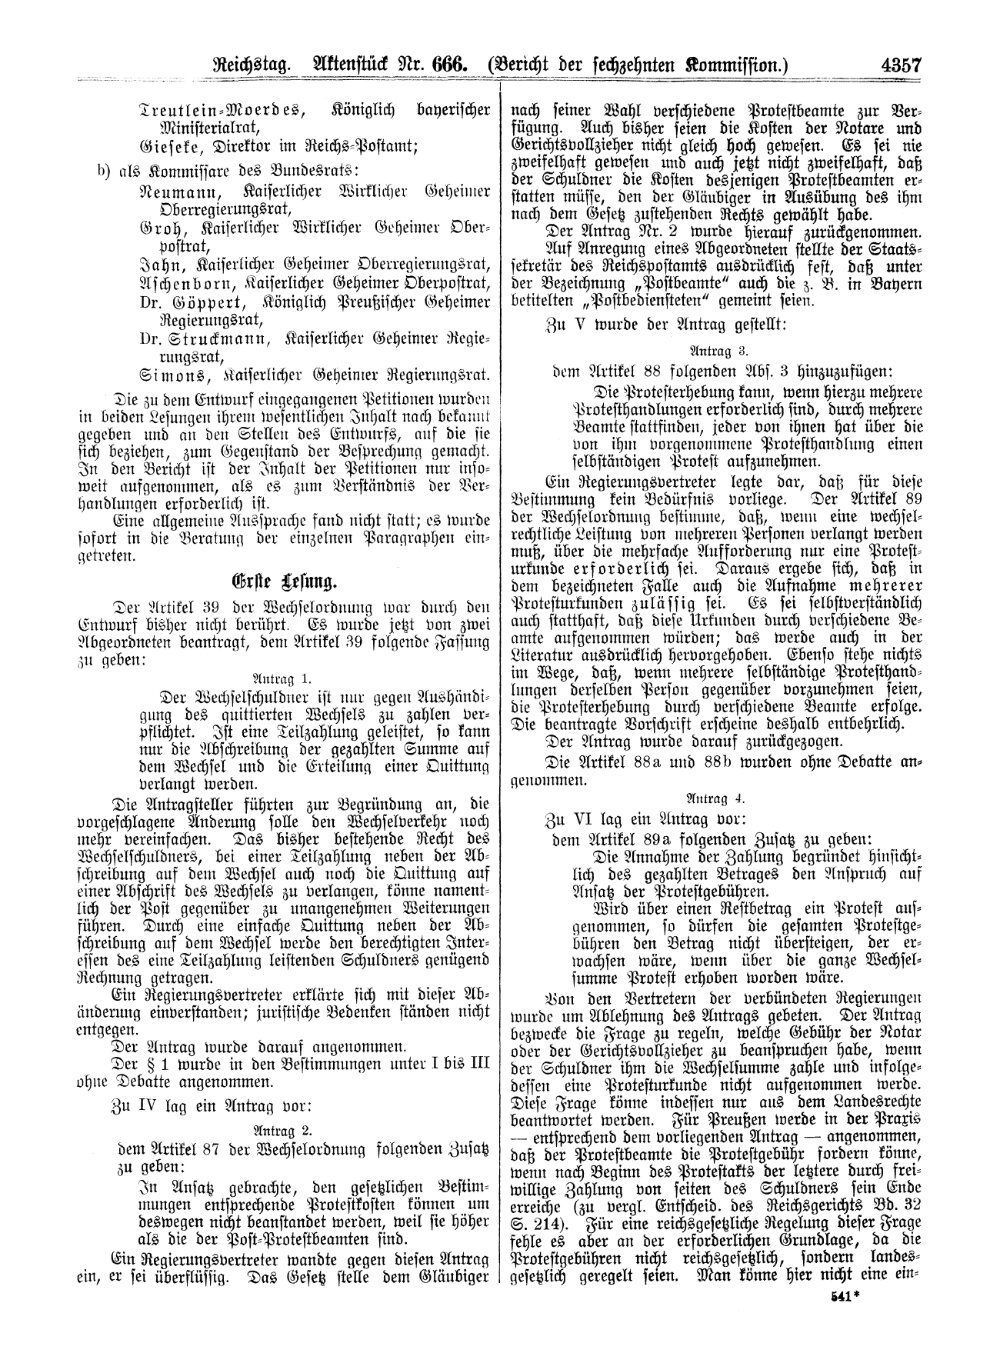 Scan of page 4357